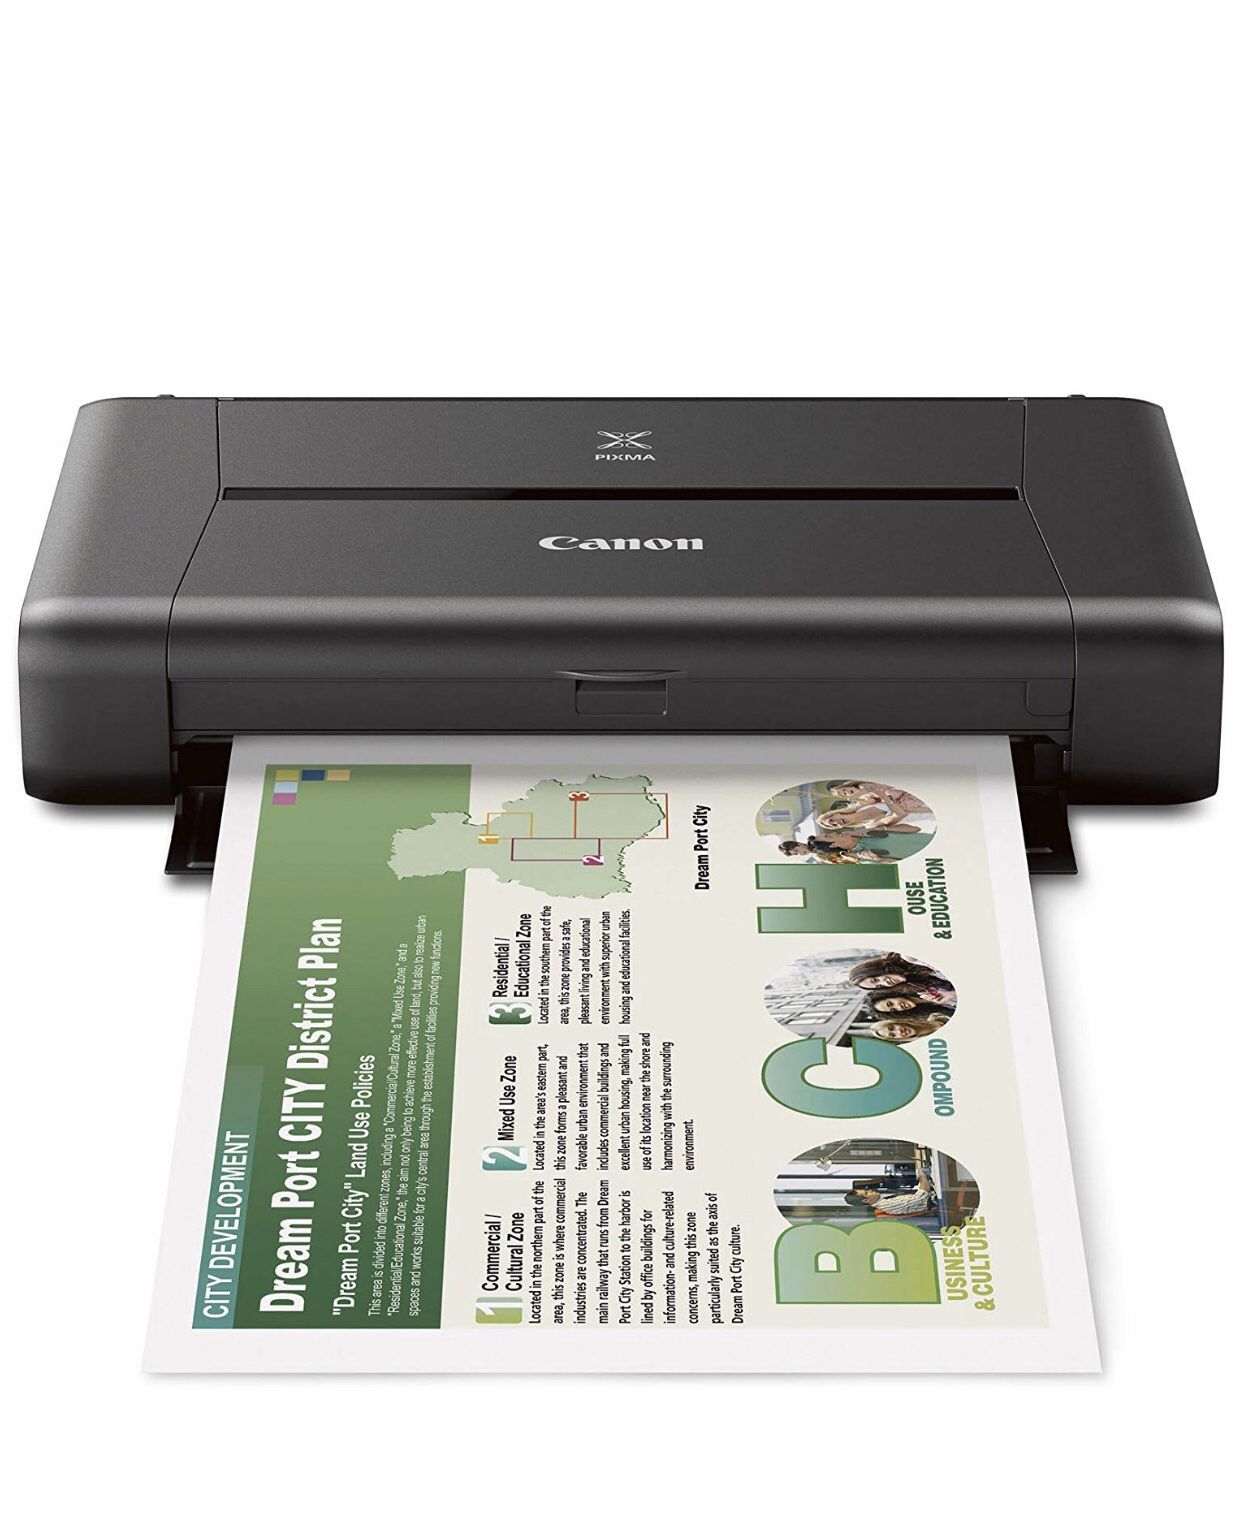 Canon Pixma iP110 Wireless Mobile Printer With Airprint And Cloud Compatible NEW IN BOX